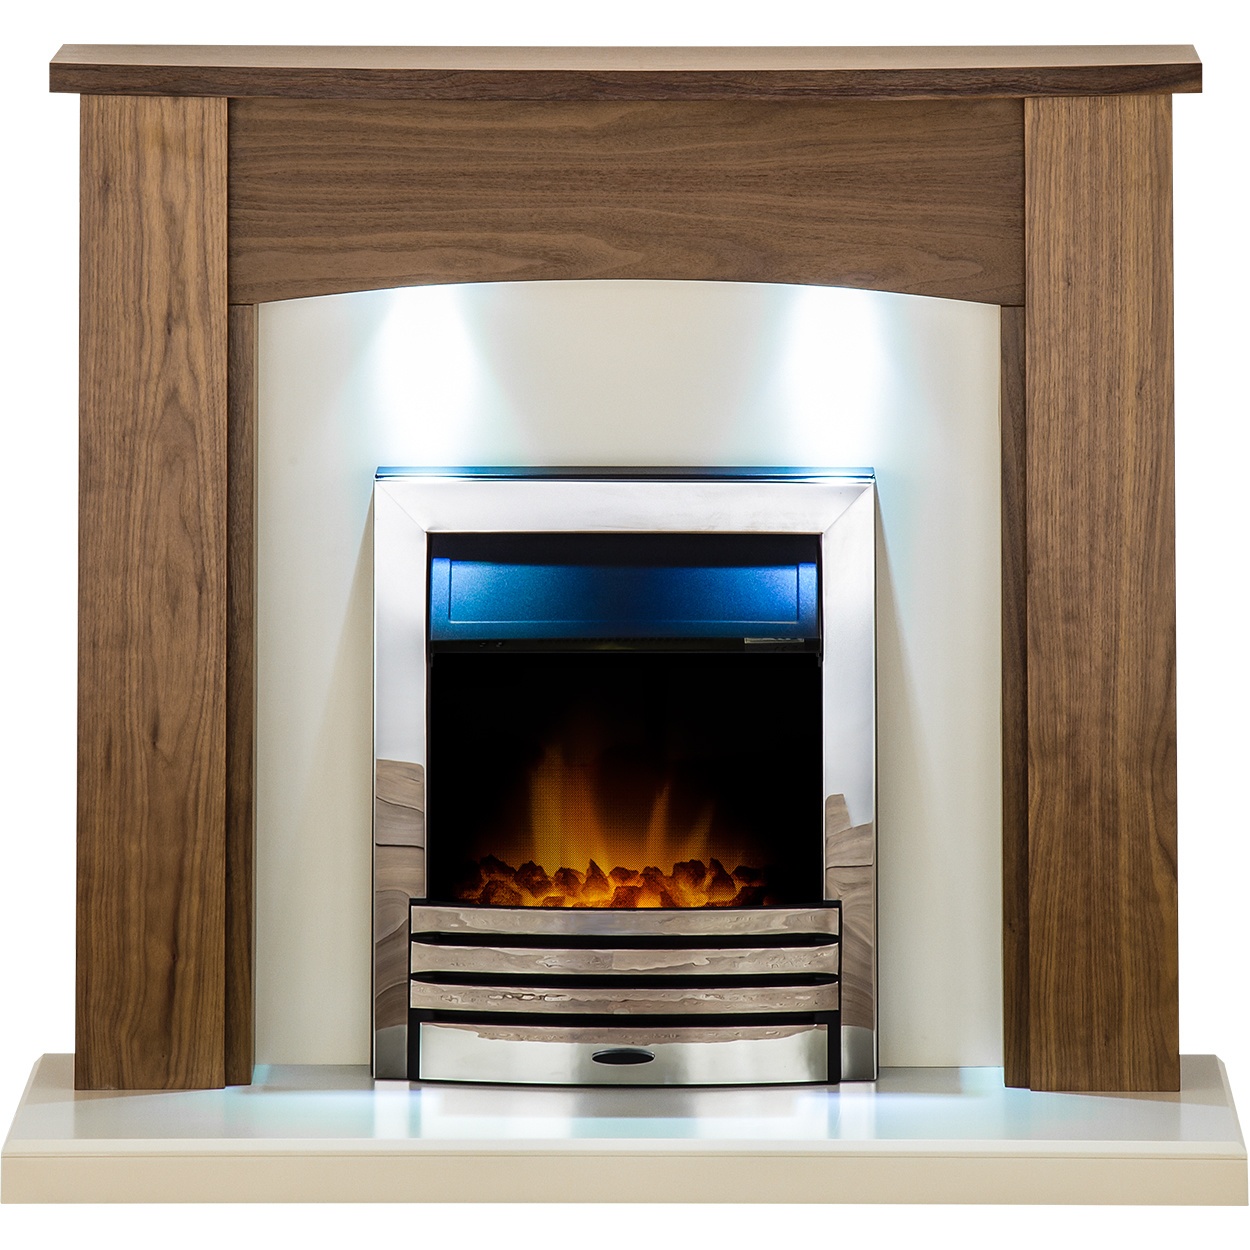 Fireplace Protector Lovely Details About Adam Fireplace Suite Walnut & Eclipse Electric Fire Chrome and Downlights 48"